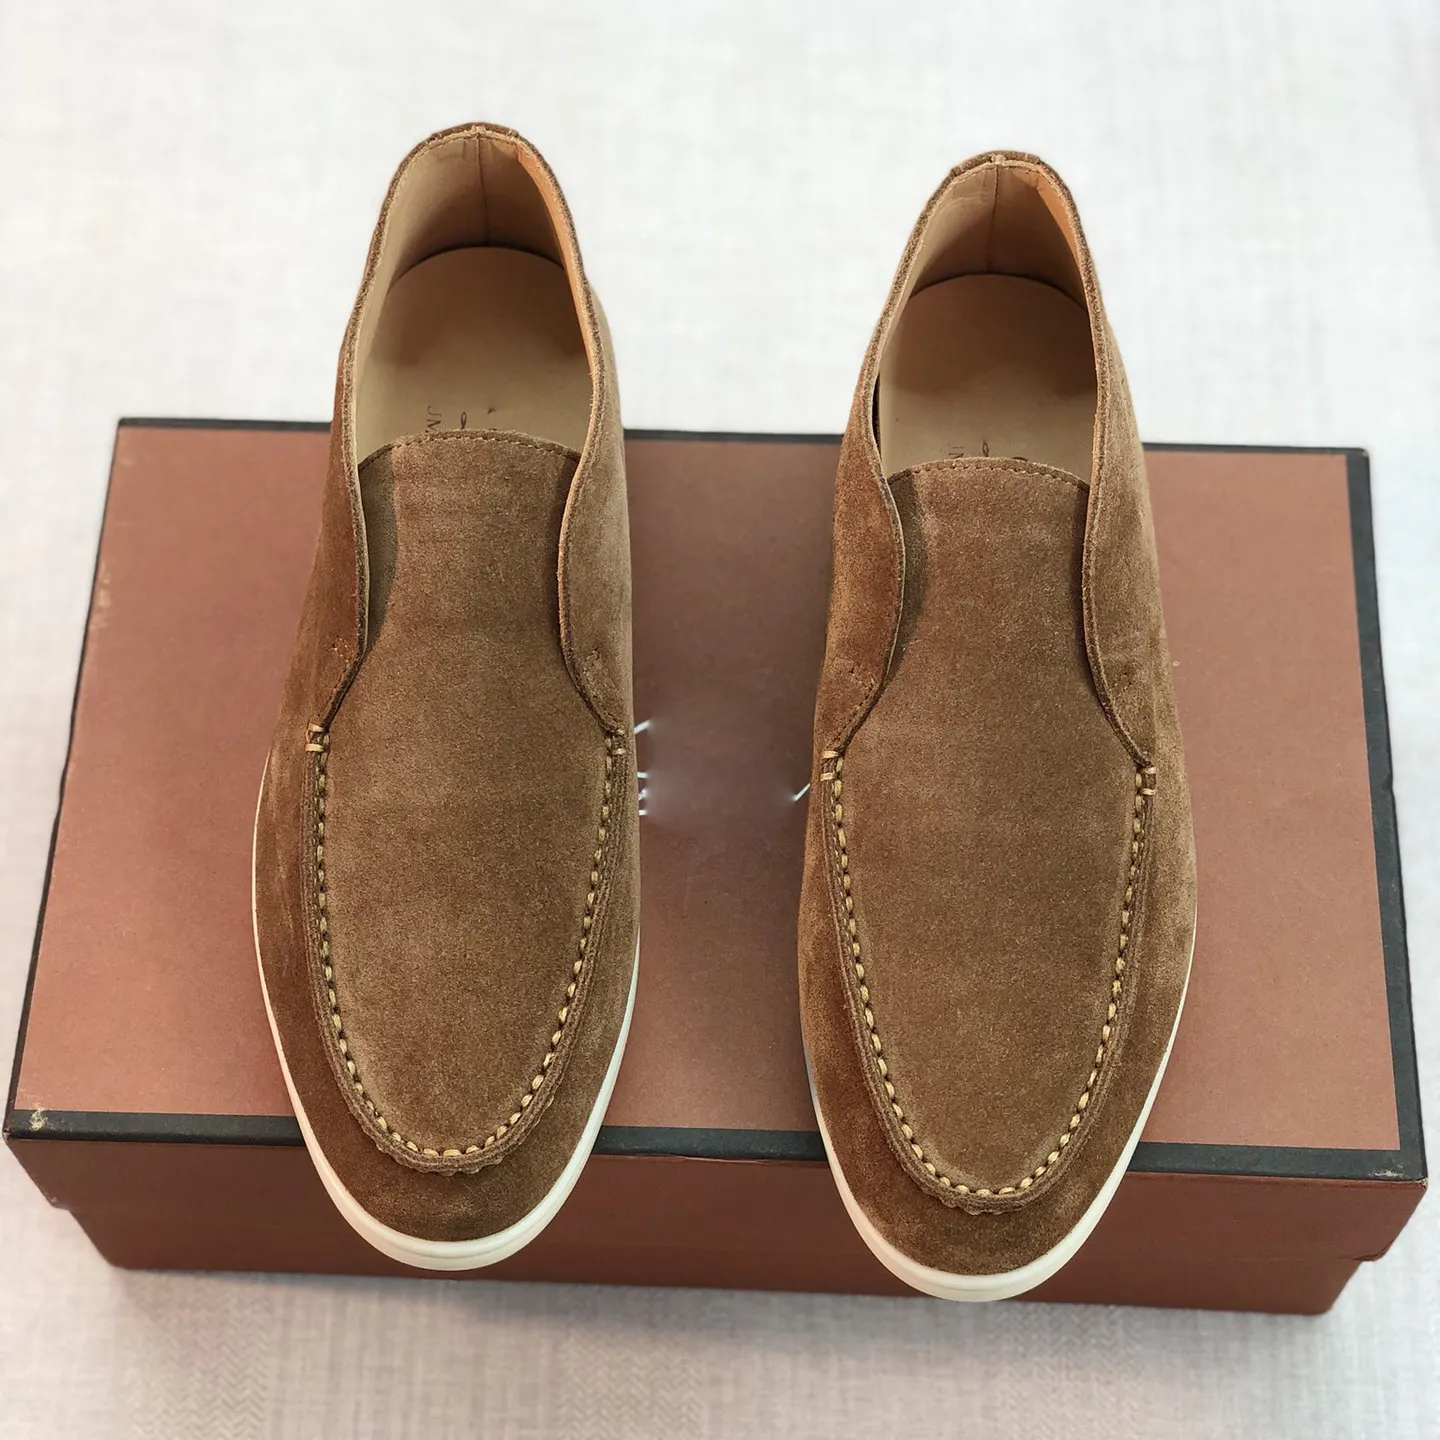 Hot Sale Nude Suede Flat Shoes Men Slip On Loafers Male Round Toe Mules Summer Walk Casual Shoes Men